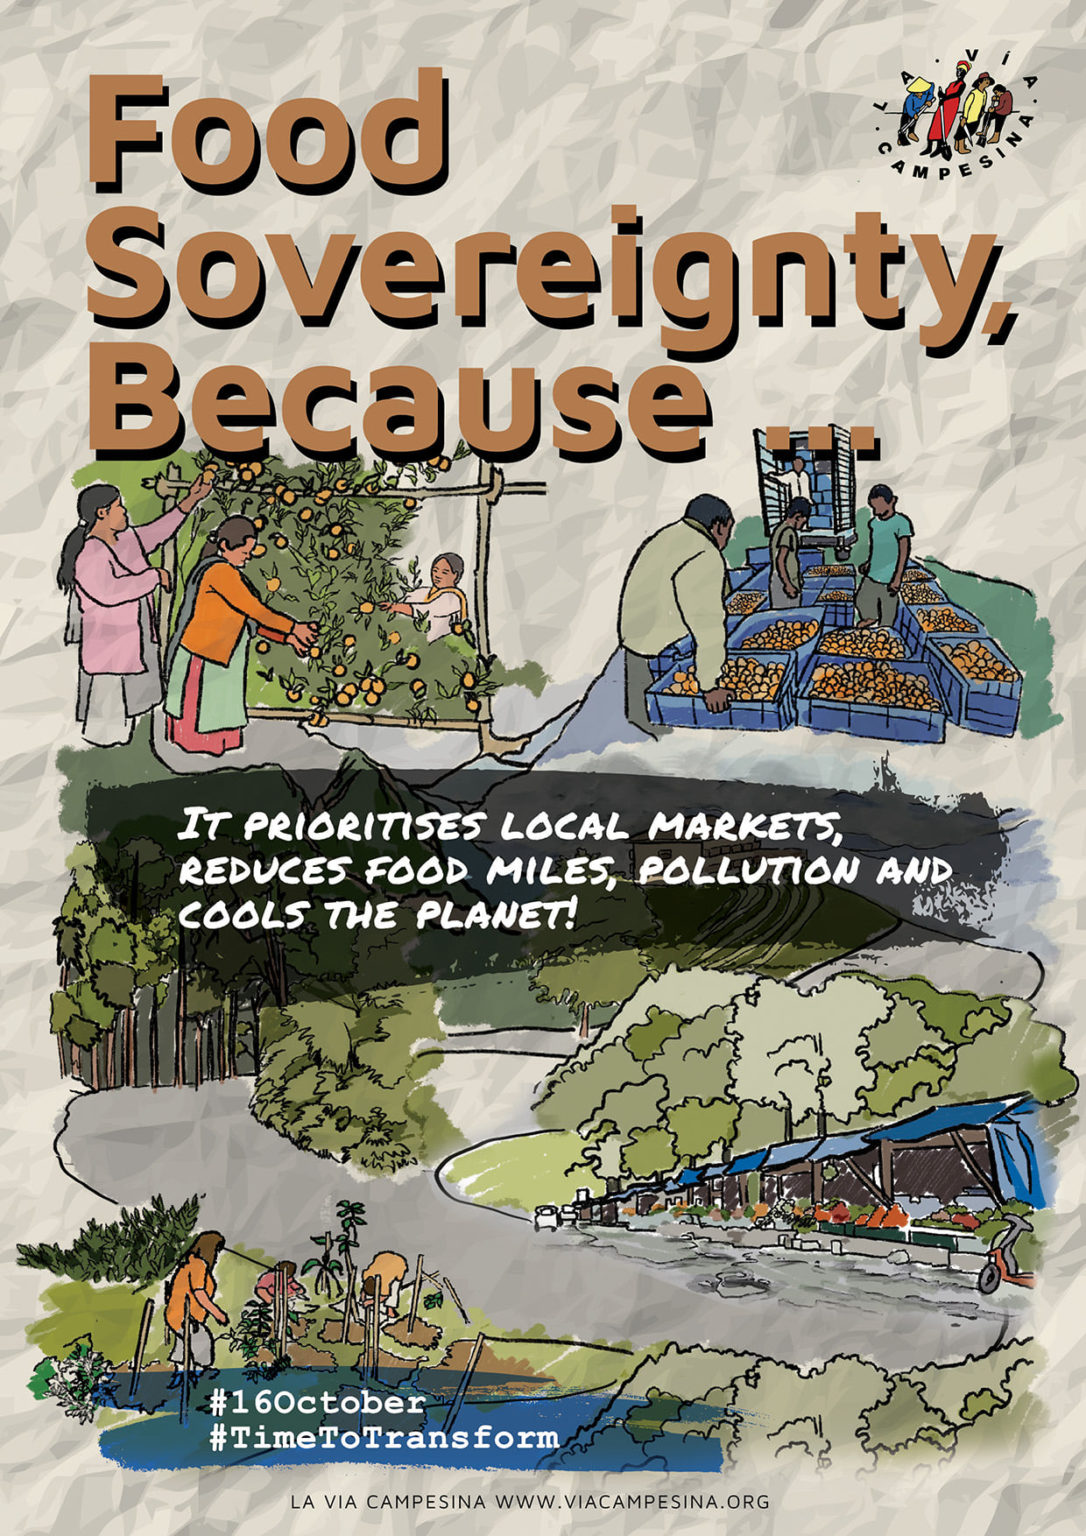 “Food Sovereignty is the flame that will show us the way”, insists La